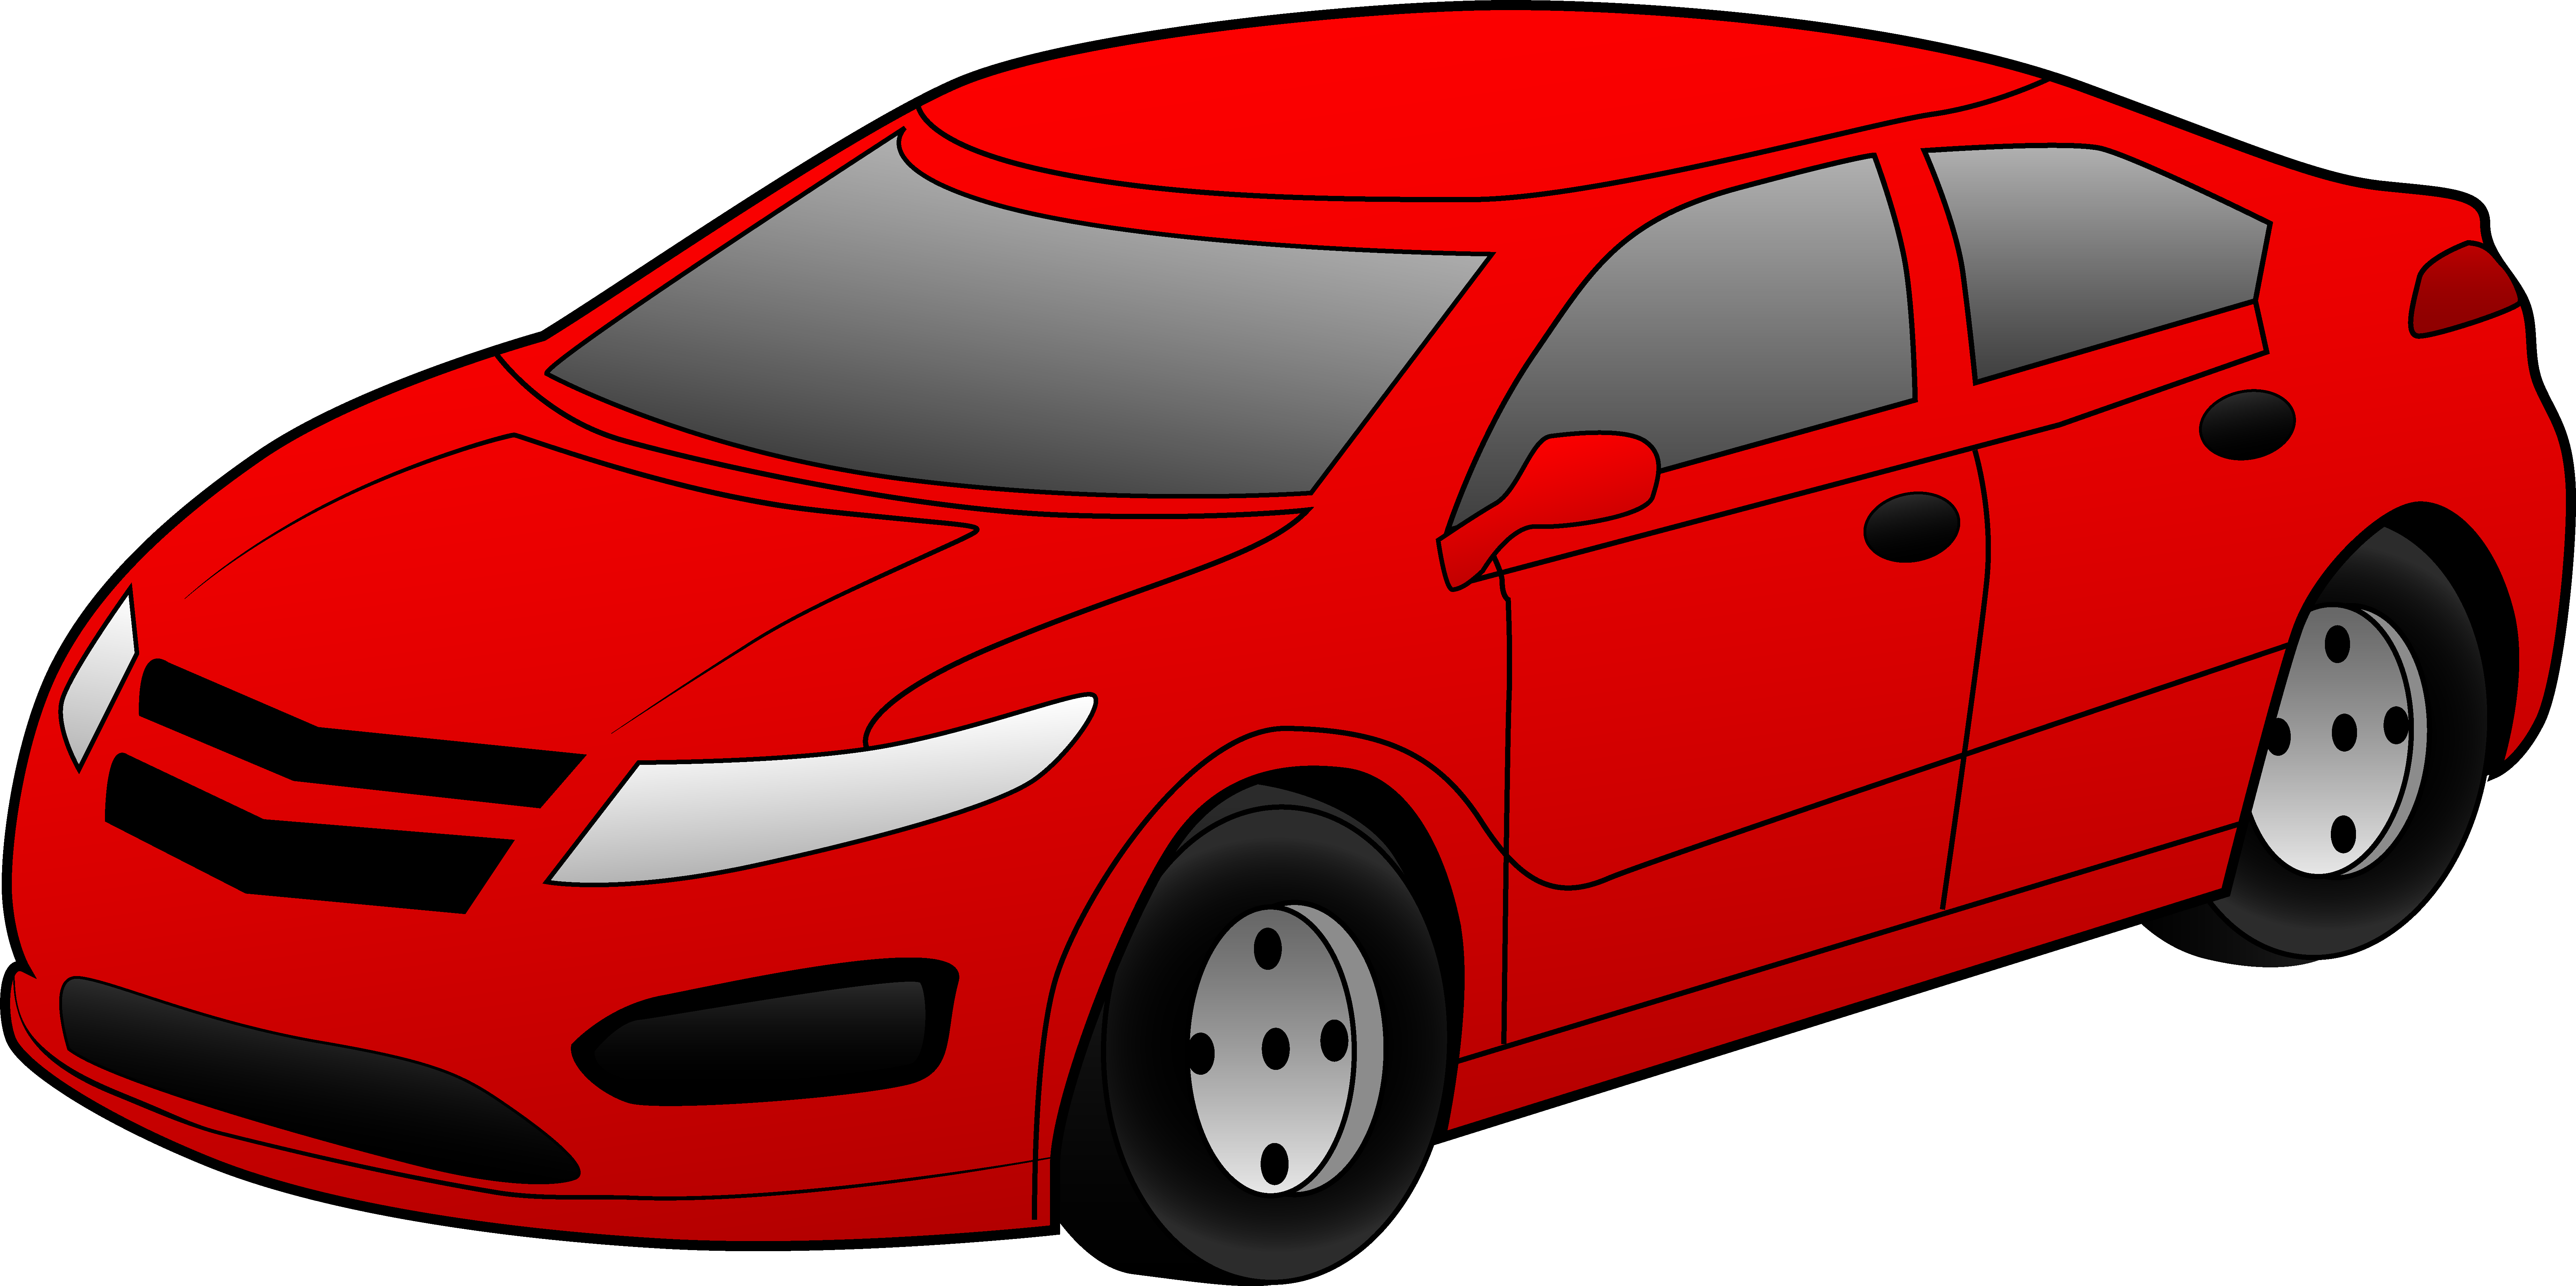 Cool Red Sports Car - Free Clip Art